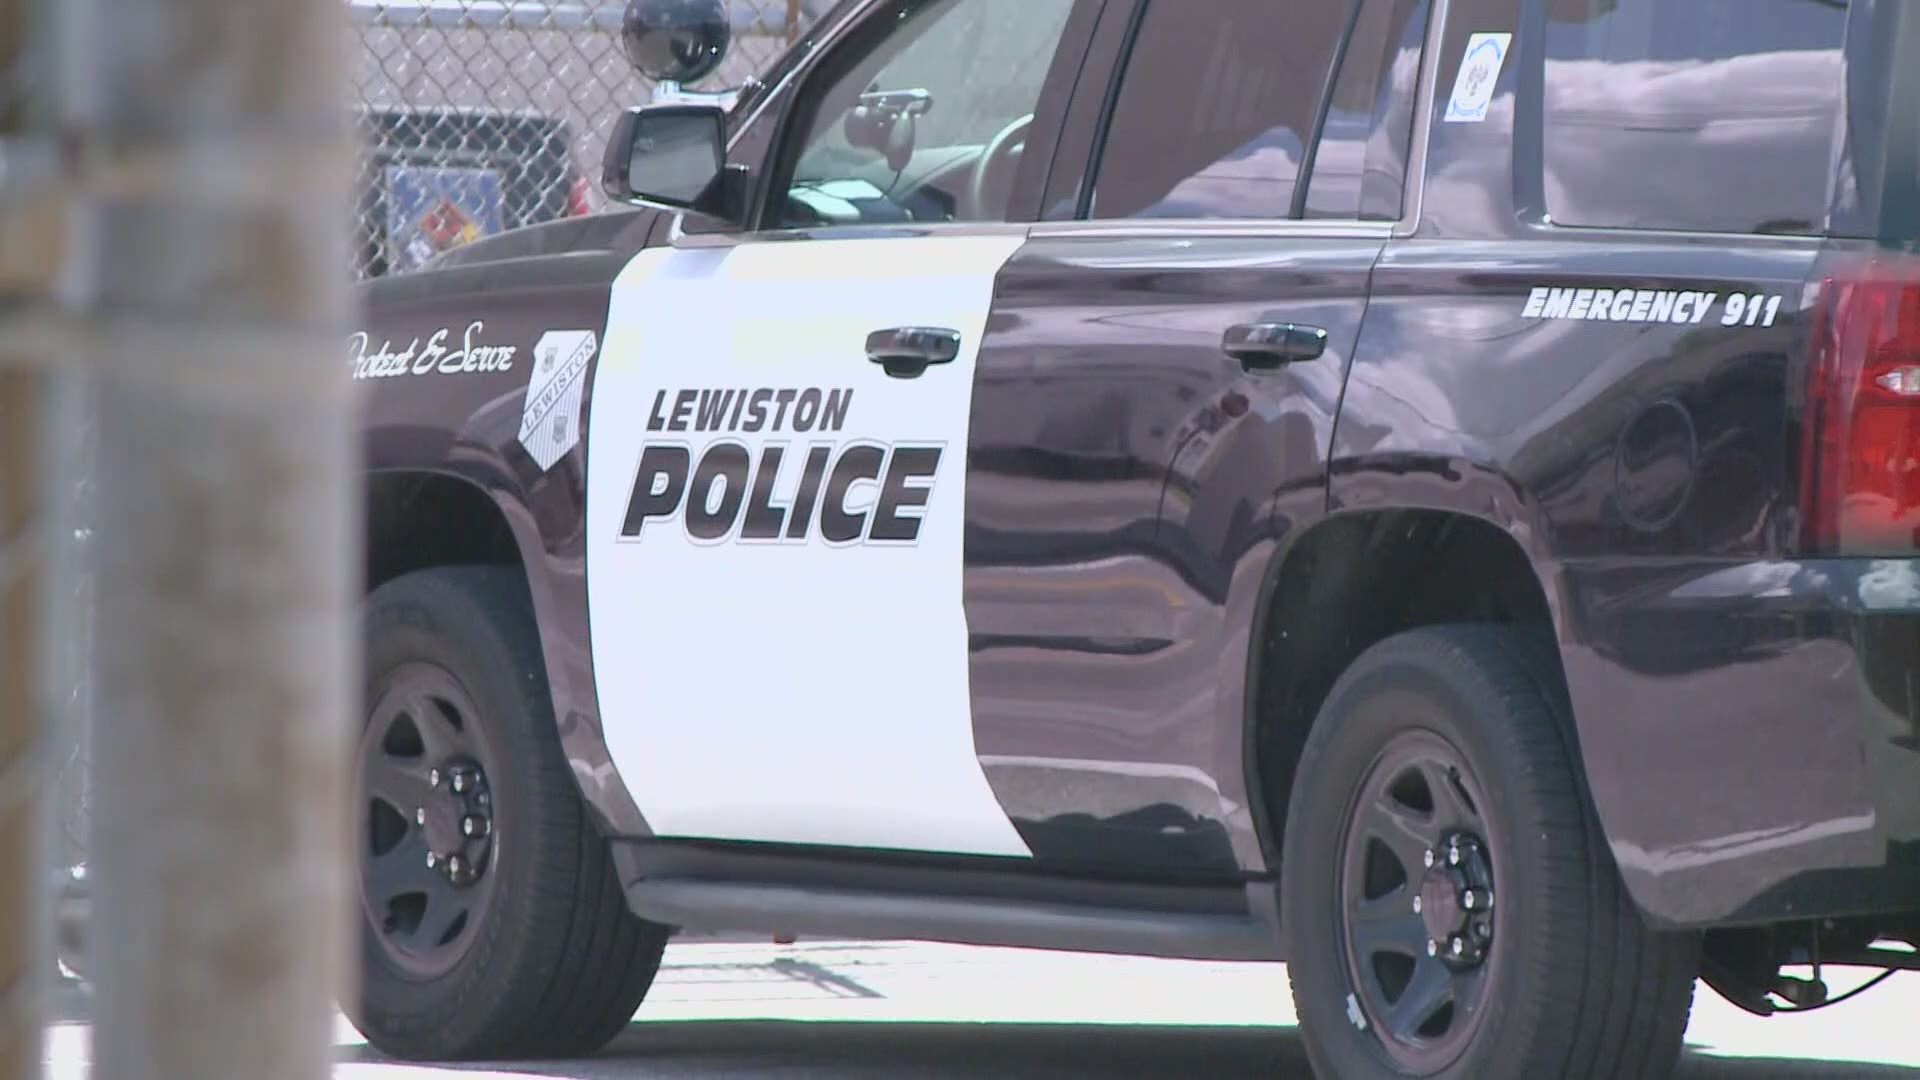 Lewiston police union and city leaders discuss police reform